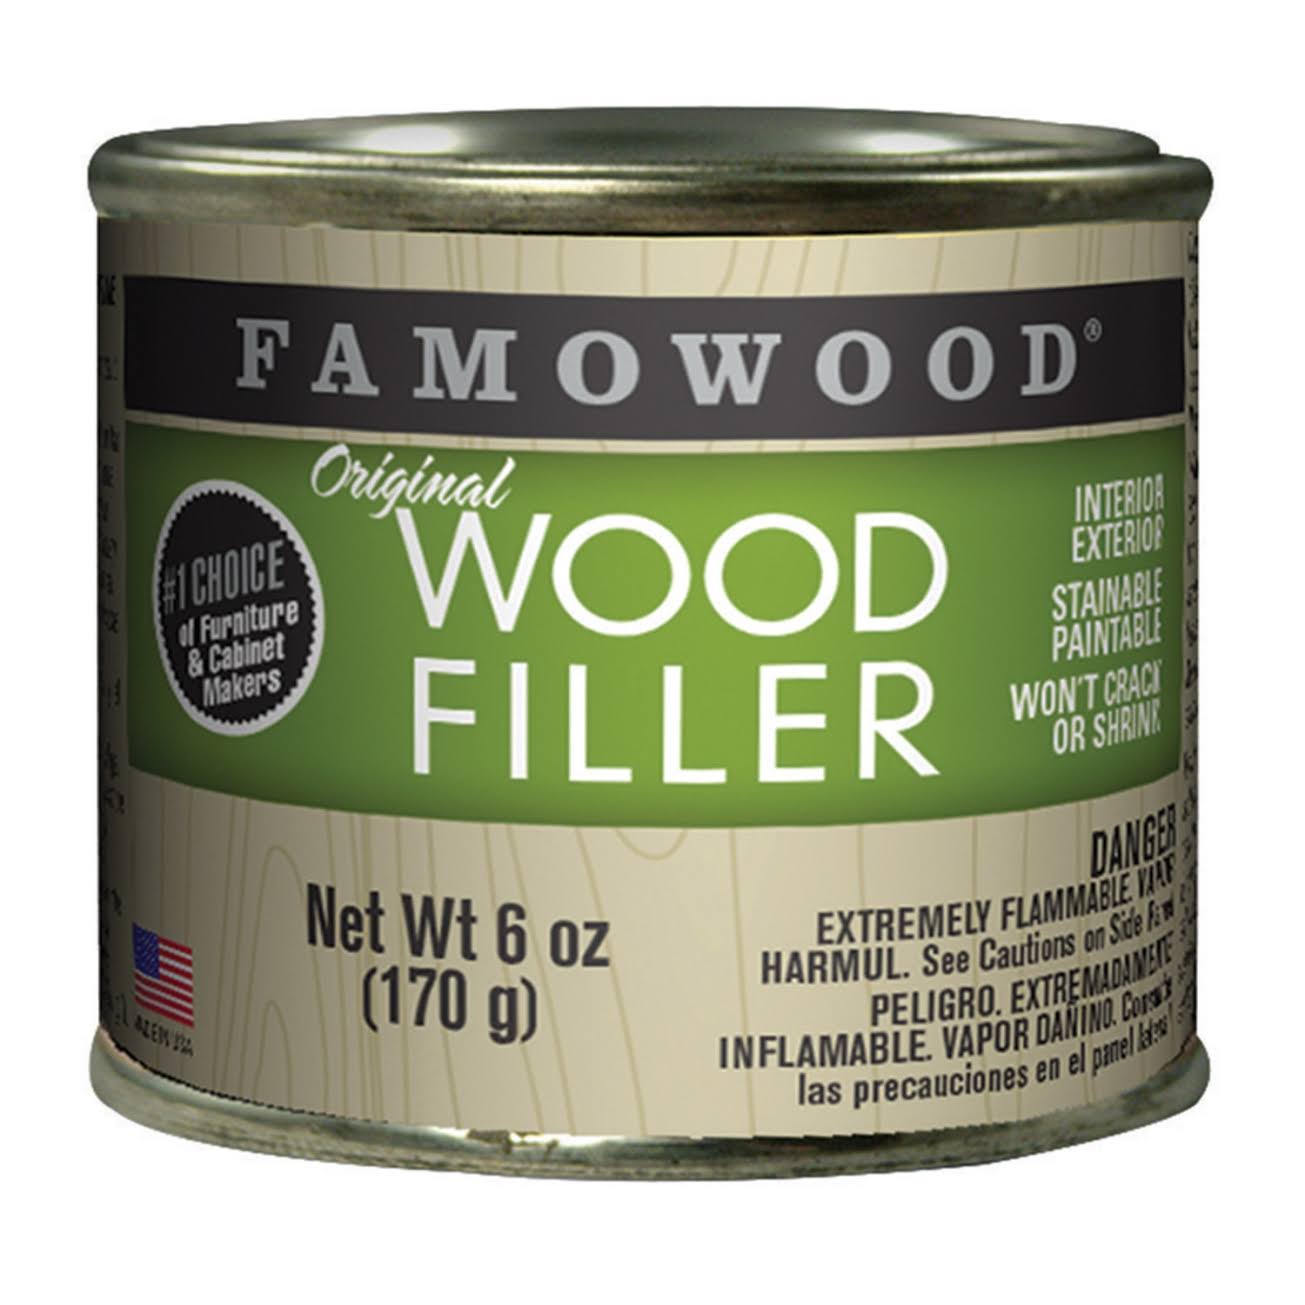 Eclectic Products Famowood Wood Filler - 170g